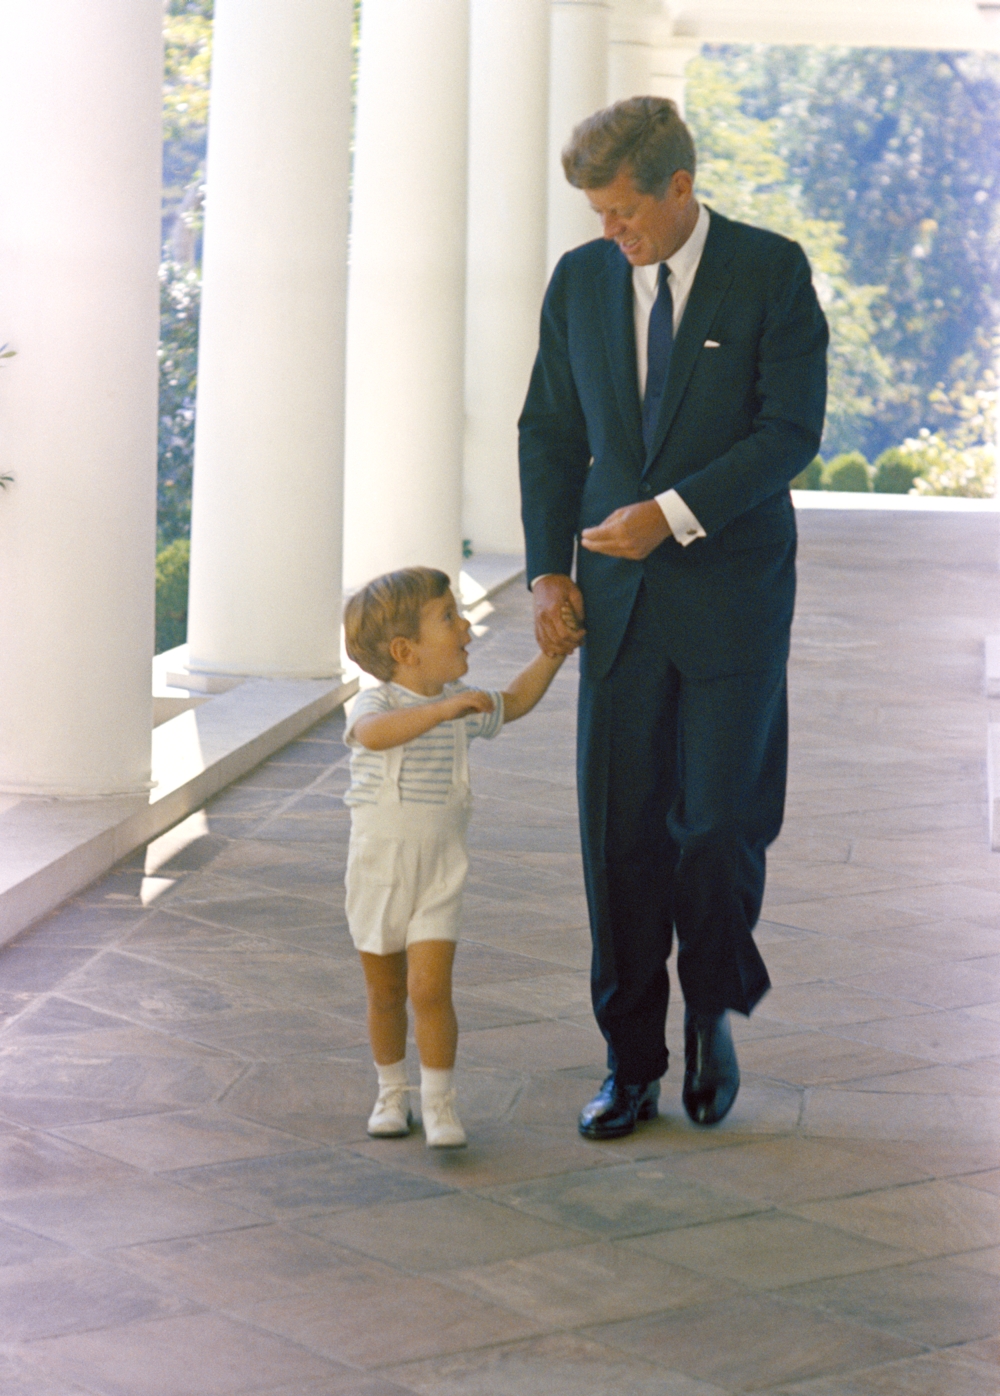 President John F. Kennedy with his son 'John John' in 1963, shortly before his assasination.